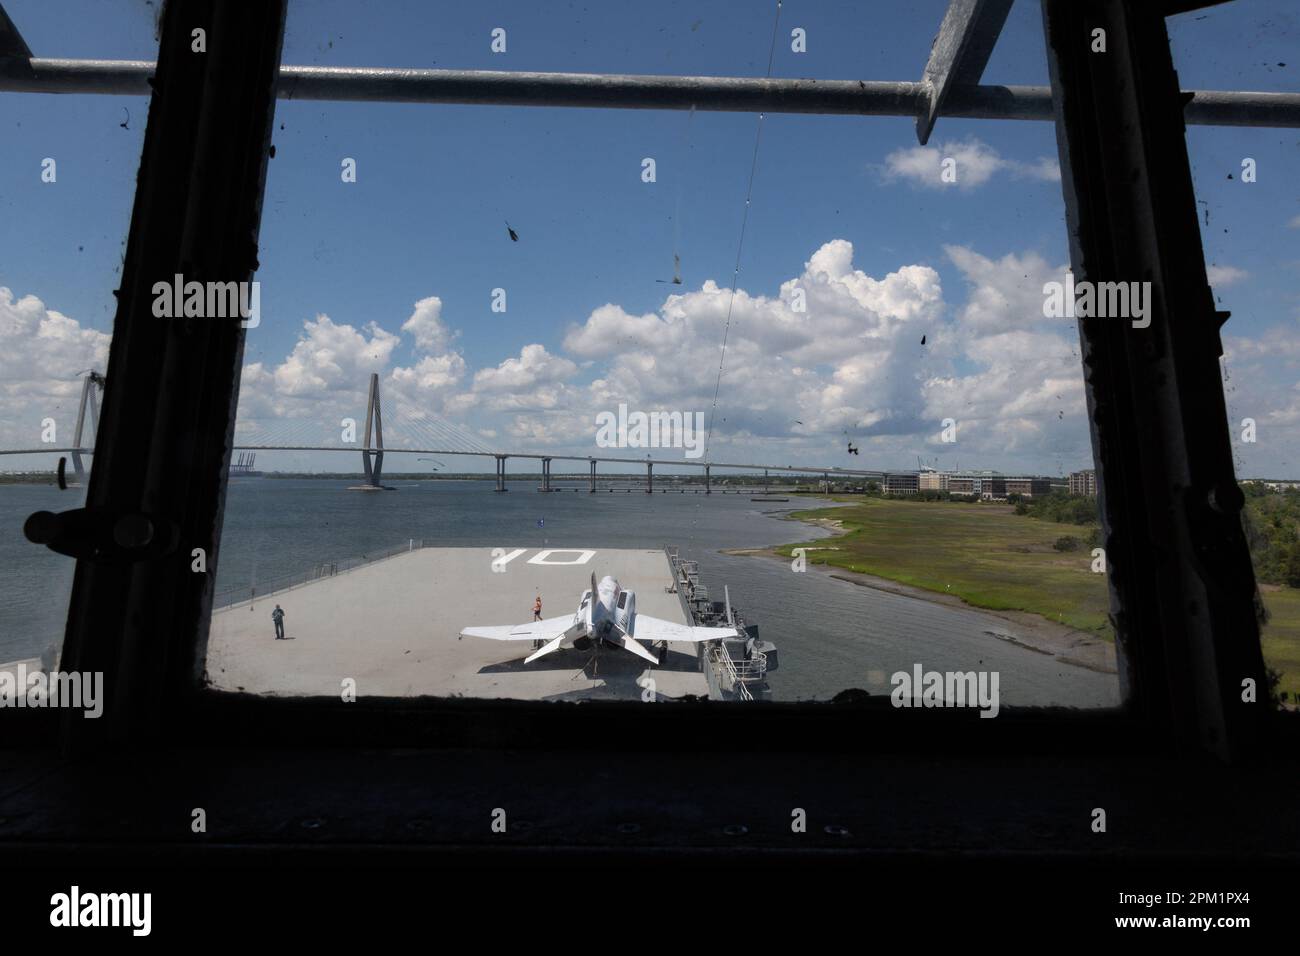 A McDonnell Douglas F-4 fighter jet seen from the helm of the USS Yorktown at Patriot's Point Naval and Maritime Museum in Mount Pleasant, SC, USA. Stock Photo